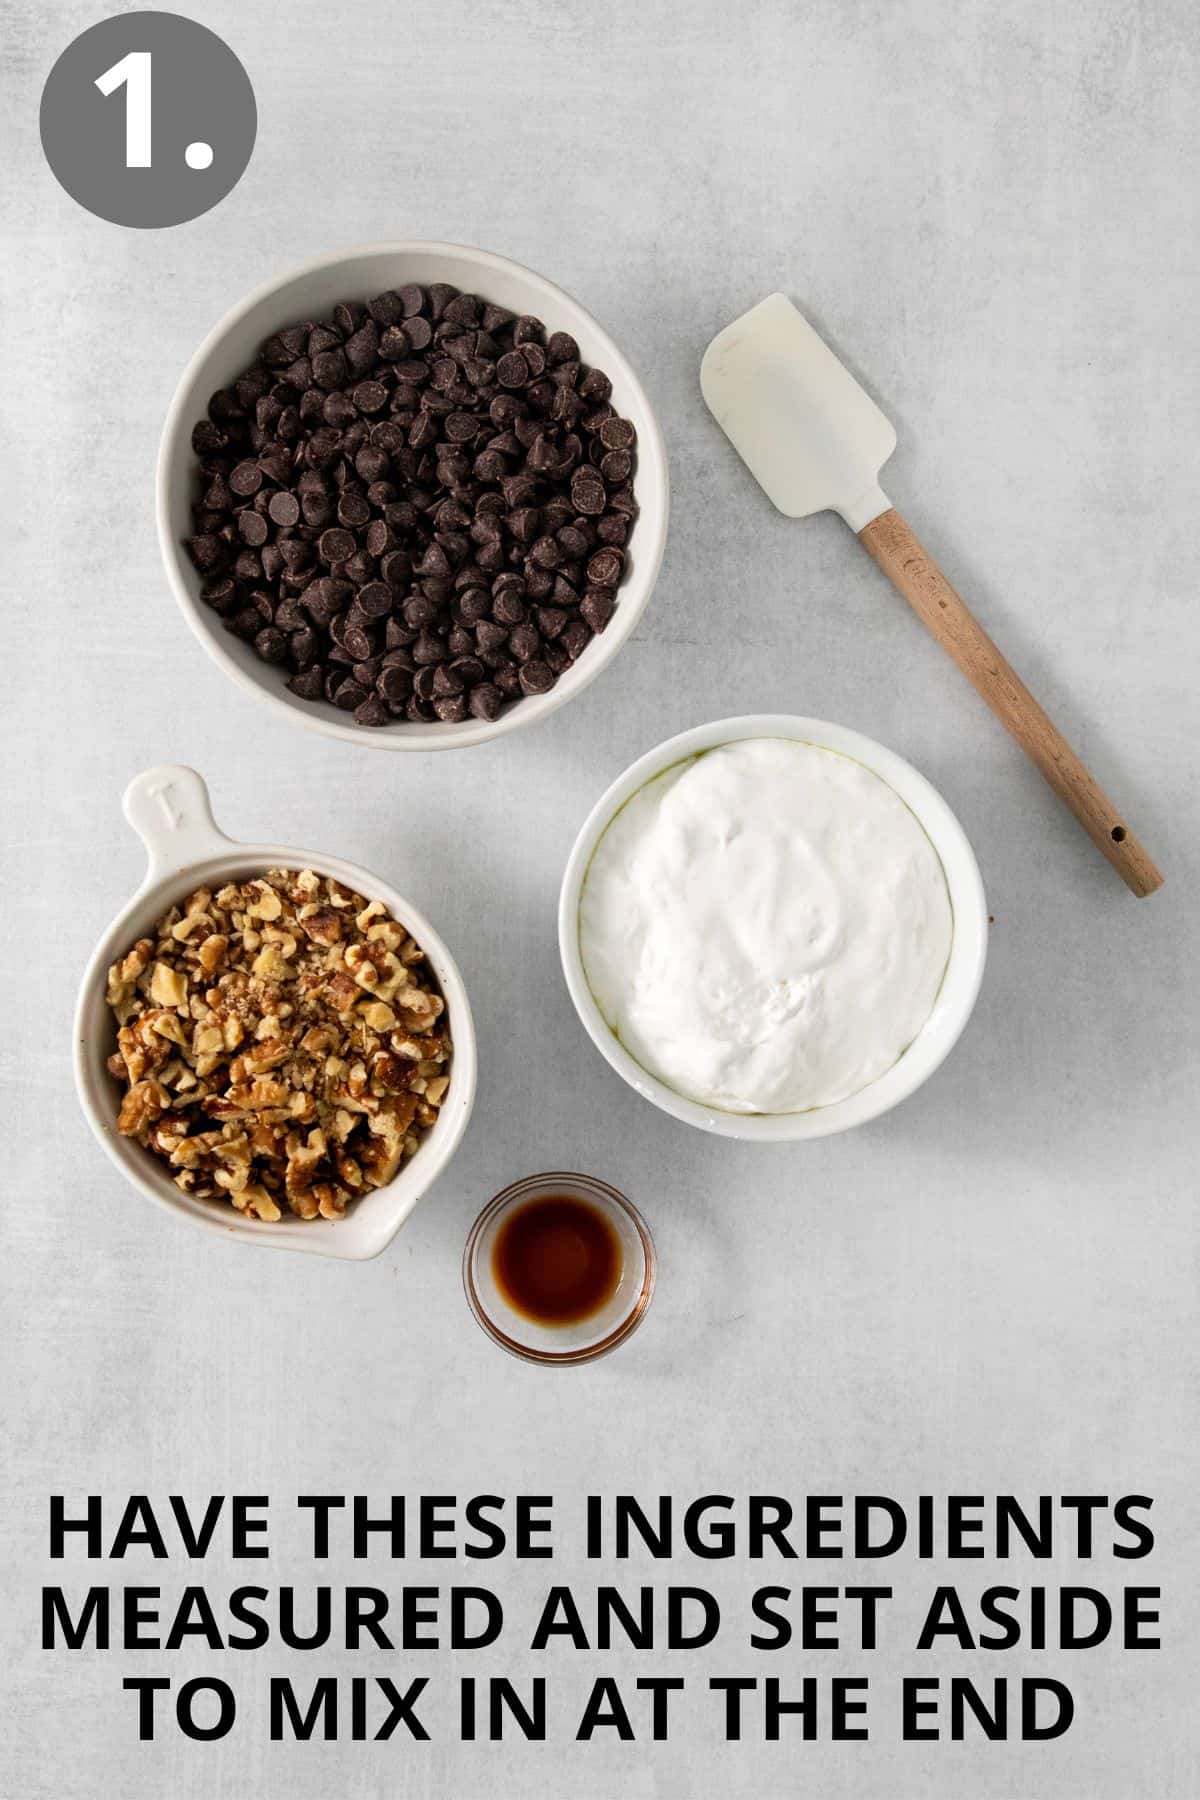 marshmallow cream fudge mix-in ingredients on a countertop